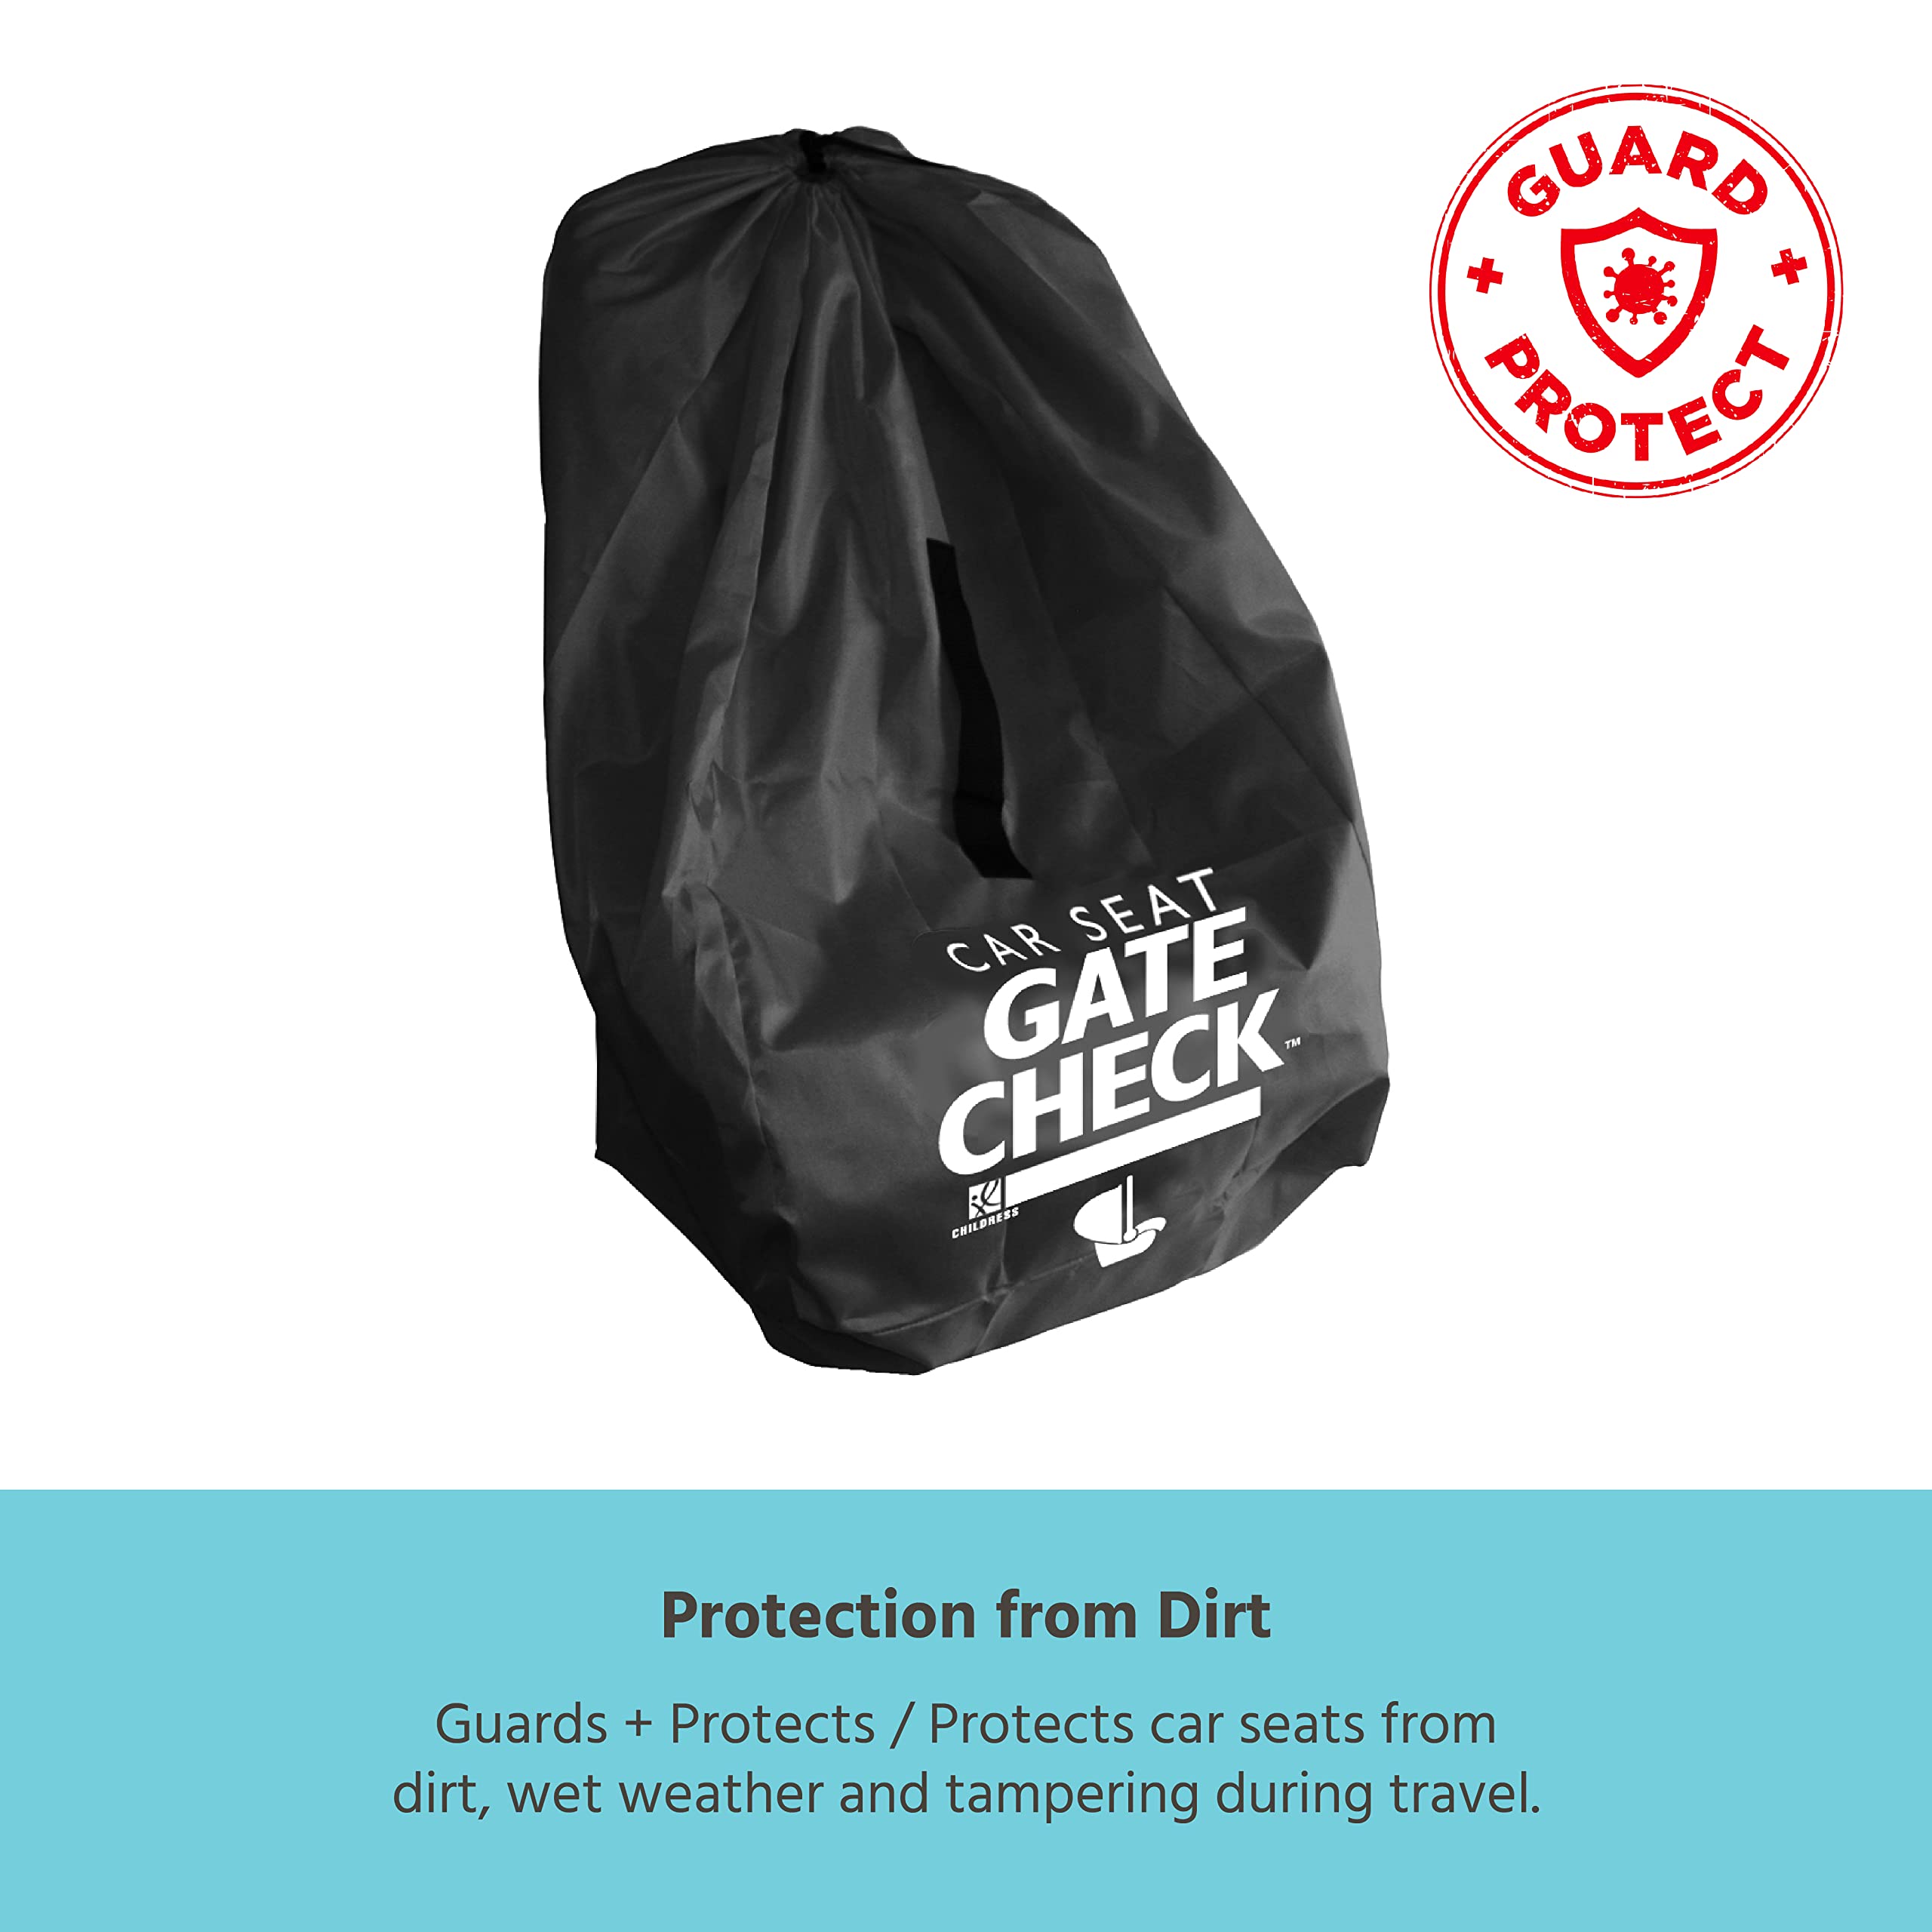 J.L. Childress Gate Check Bag for Car Seats - Air Travel Bag - Fits Convertible Car Seats, Infant carriers & Booster Seats U1